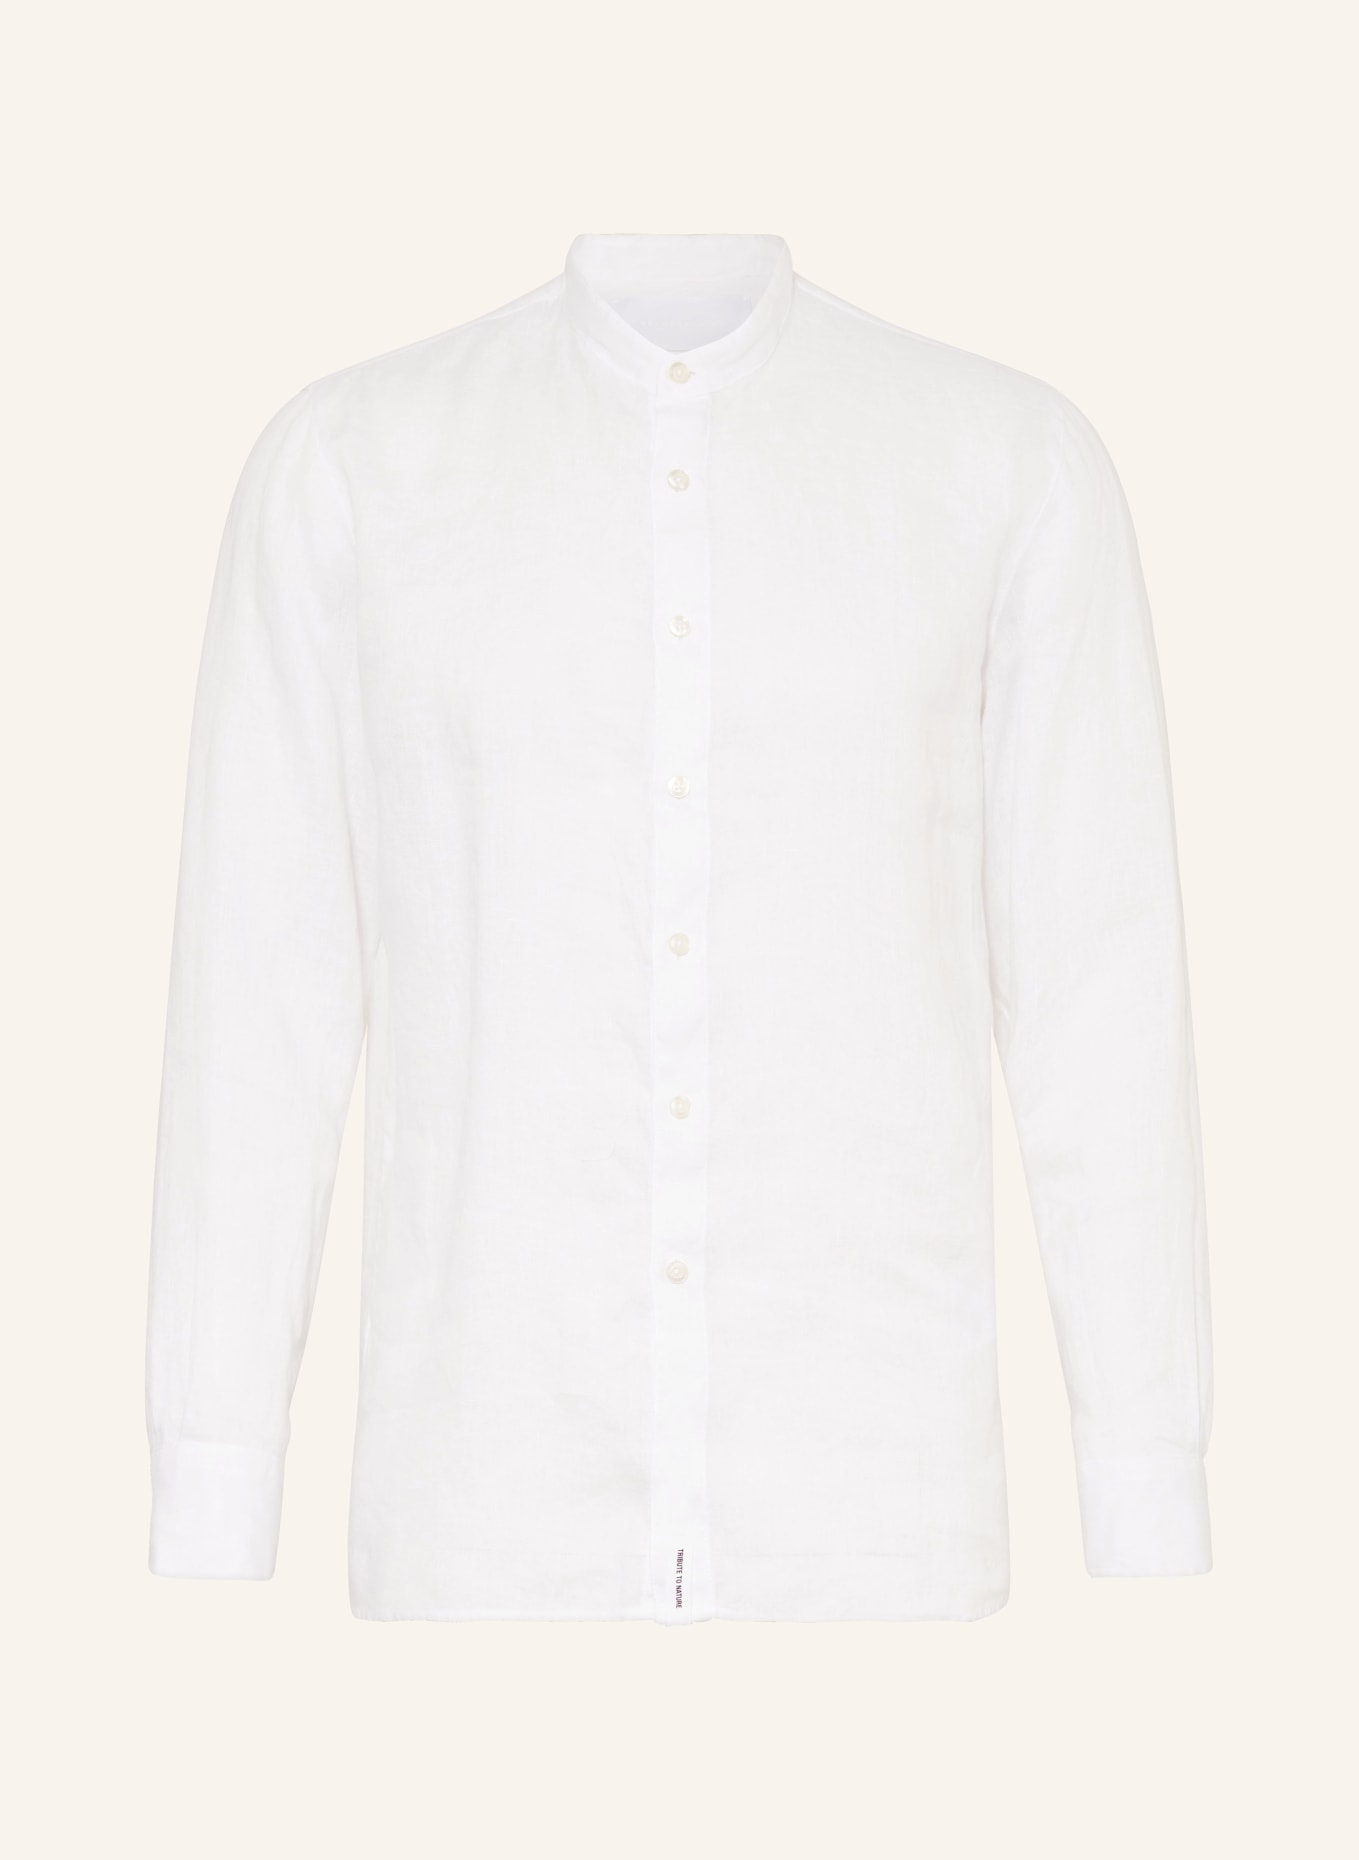 BALDESSARINI Linen shirt regular fit with stand-up collar, Color: WHITE (Image 1)